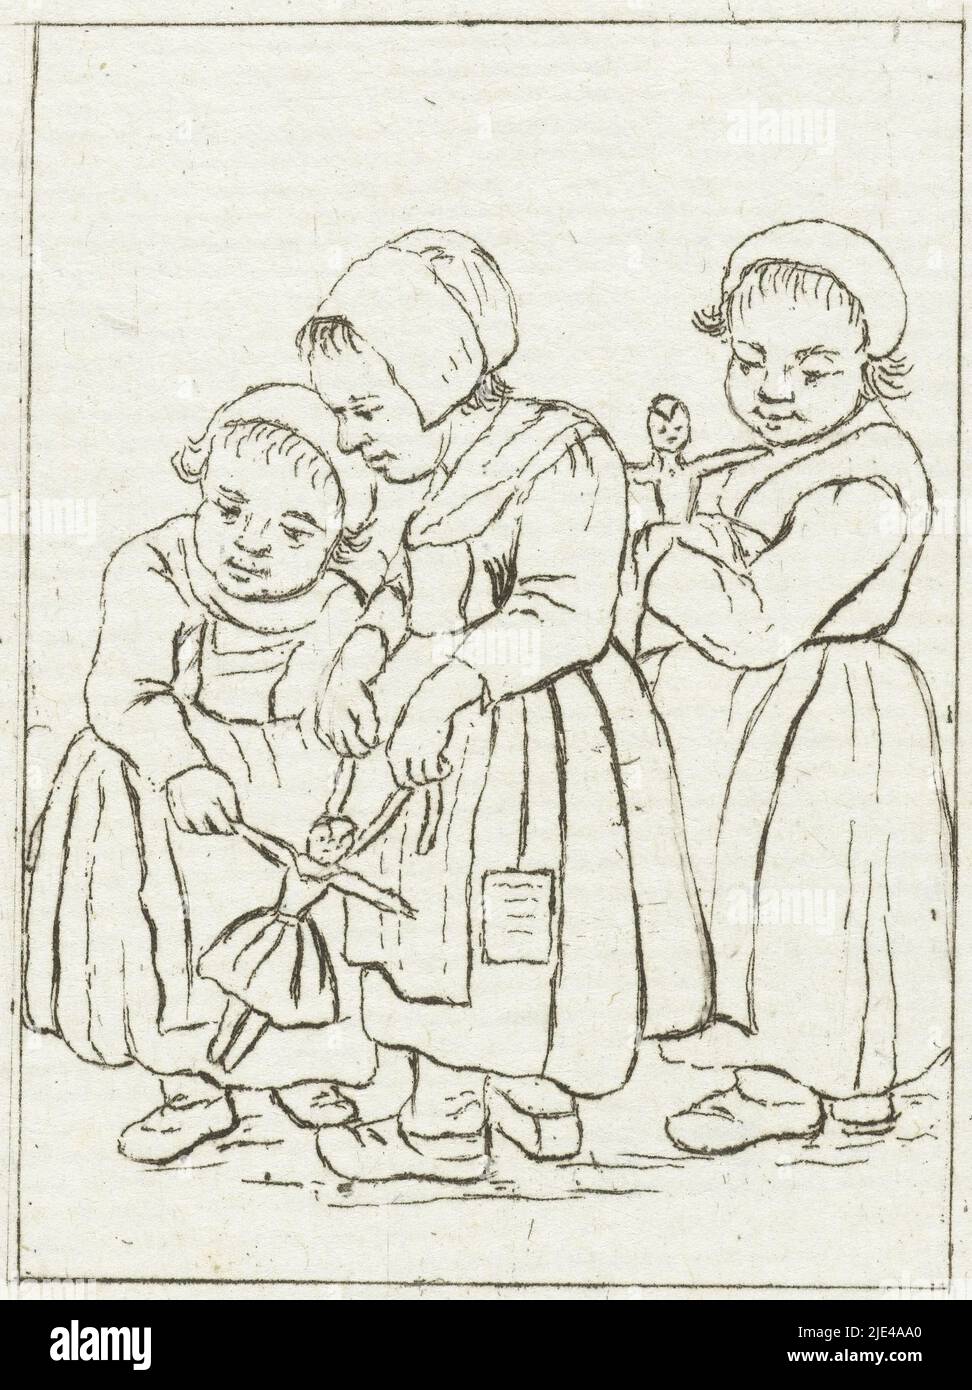 Three girls with dolls, Pieter de Mare, after Christina Chalon, 1777 - 1779, Three girls playing with dolls. One girl holds a doll in her hands. Next to her, the other two girls are playing with a doll., print maker: Pieter de Mare, intermediary draughtsman: Christina Chalon, Leiden, 1777 - 1779, paper, etching, w 55 mm × h 70 mm Stock Photo